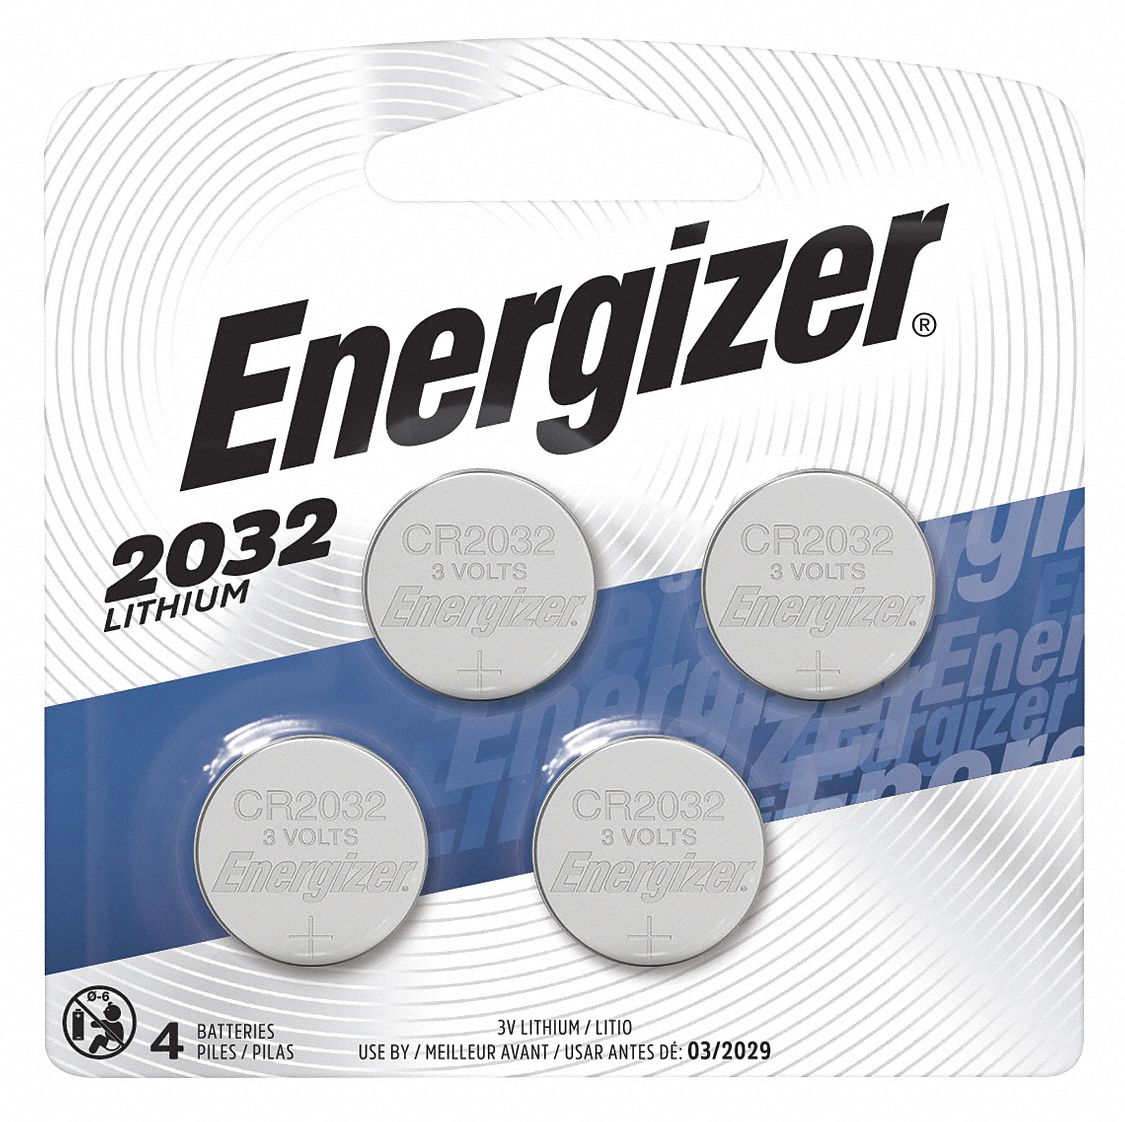 energizer-2032-battery-size-lithium-coin-cell-battery-45ej83